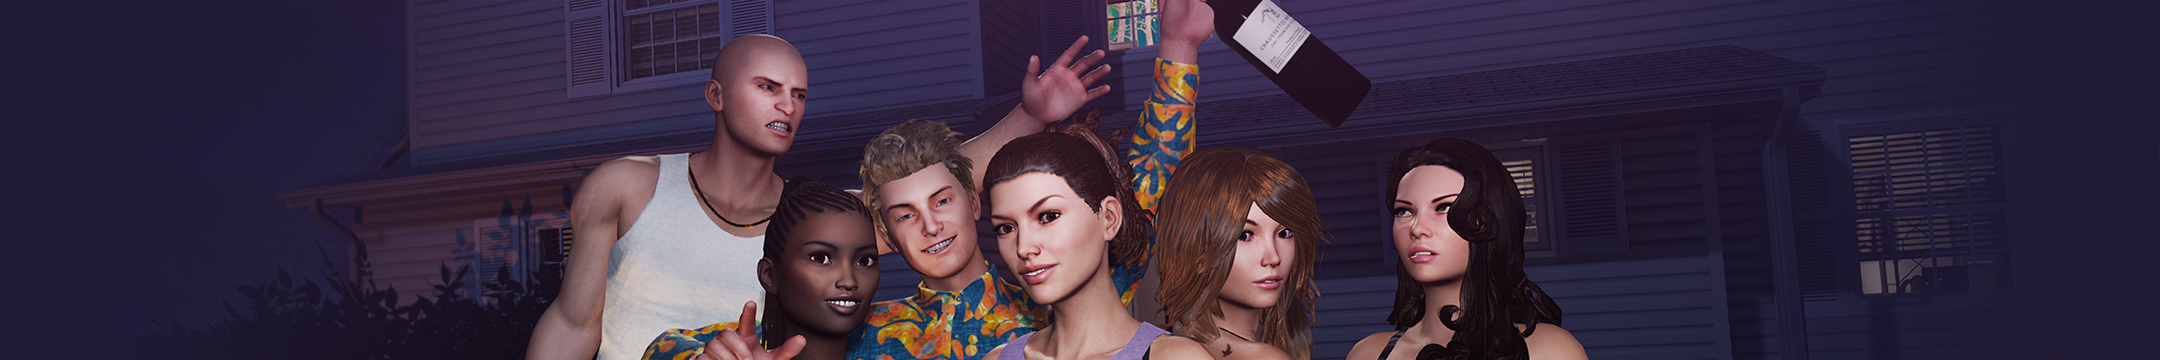 House Party - New Content Pack